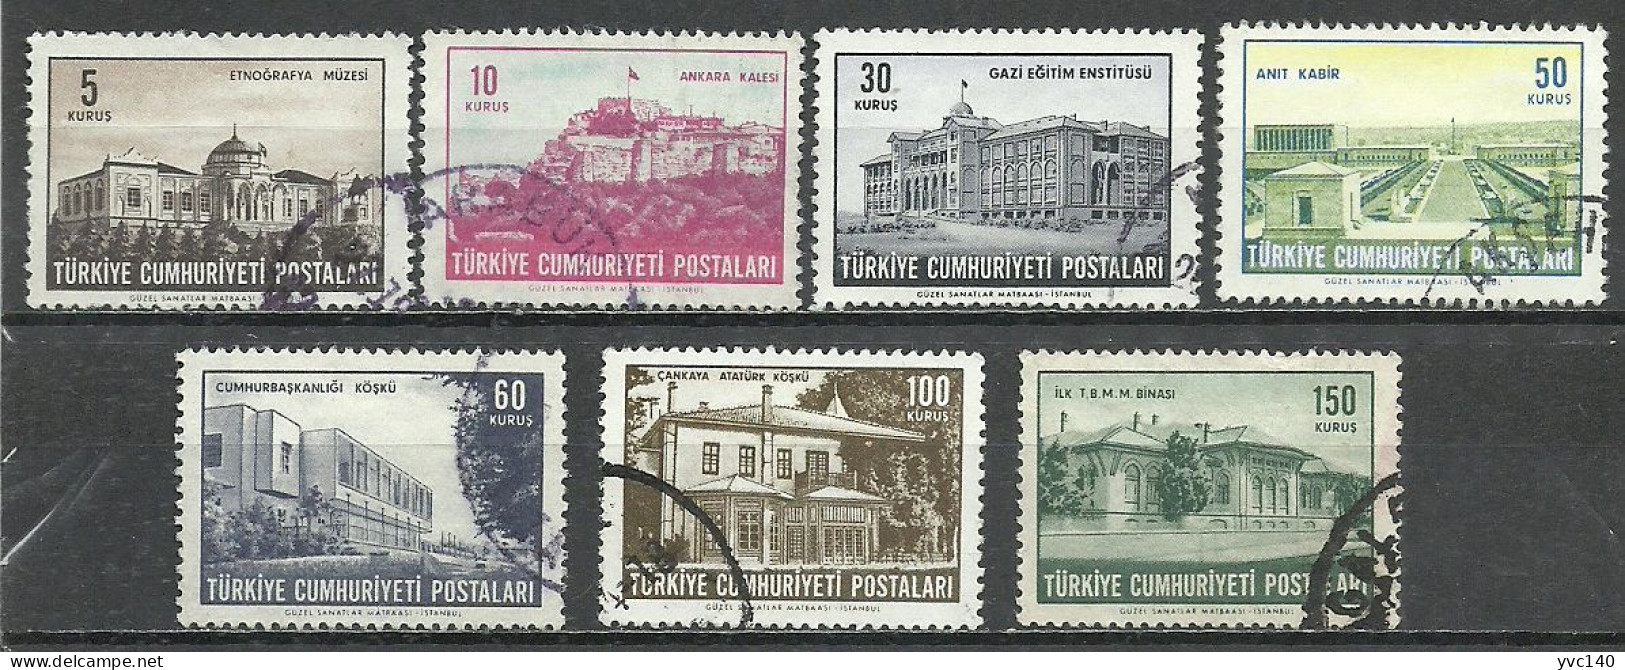 Turkey: 1963 Regular Issue Stamps - Used Stamps